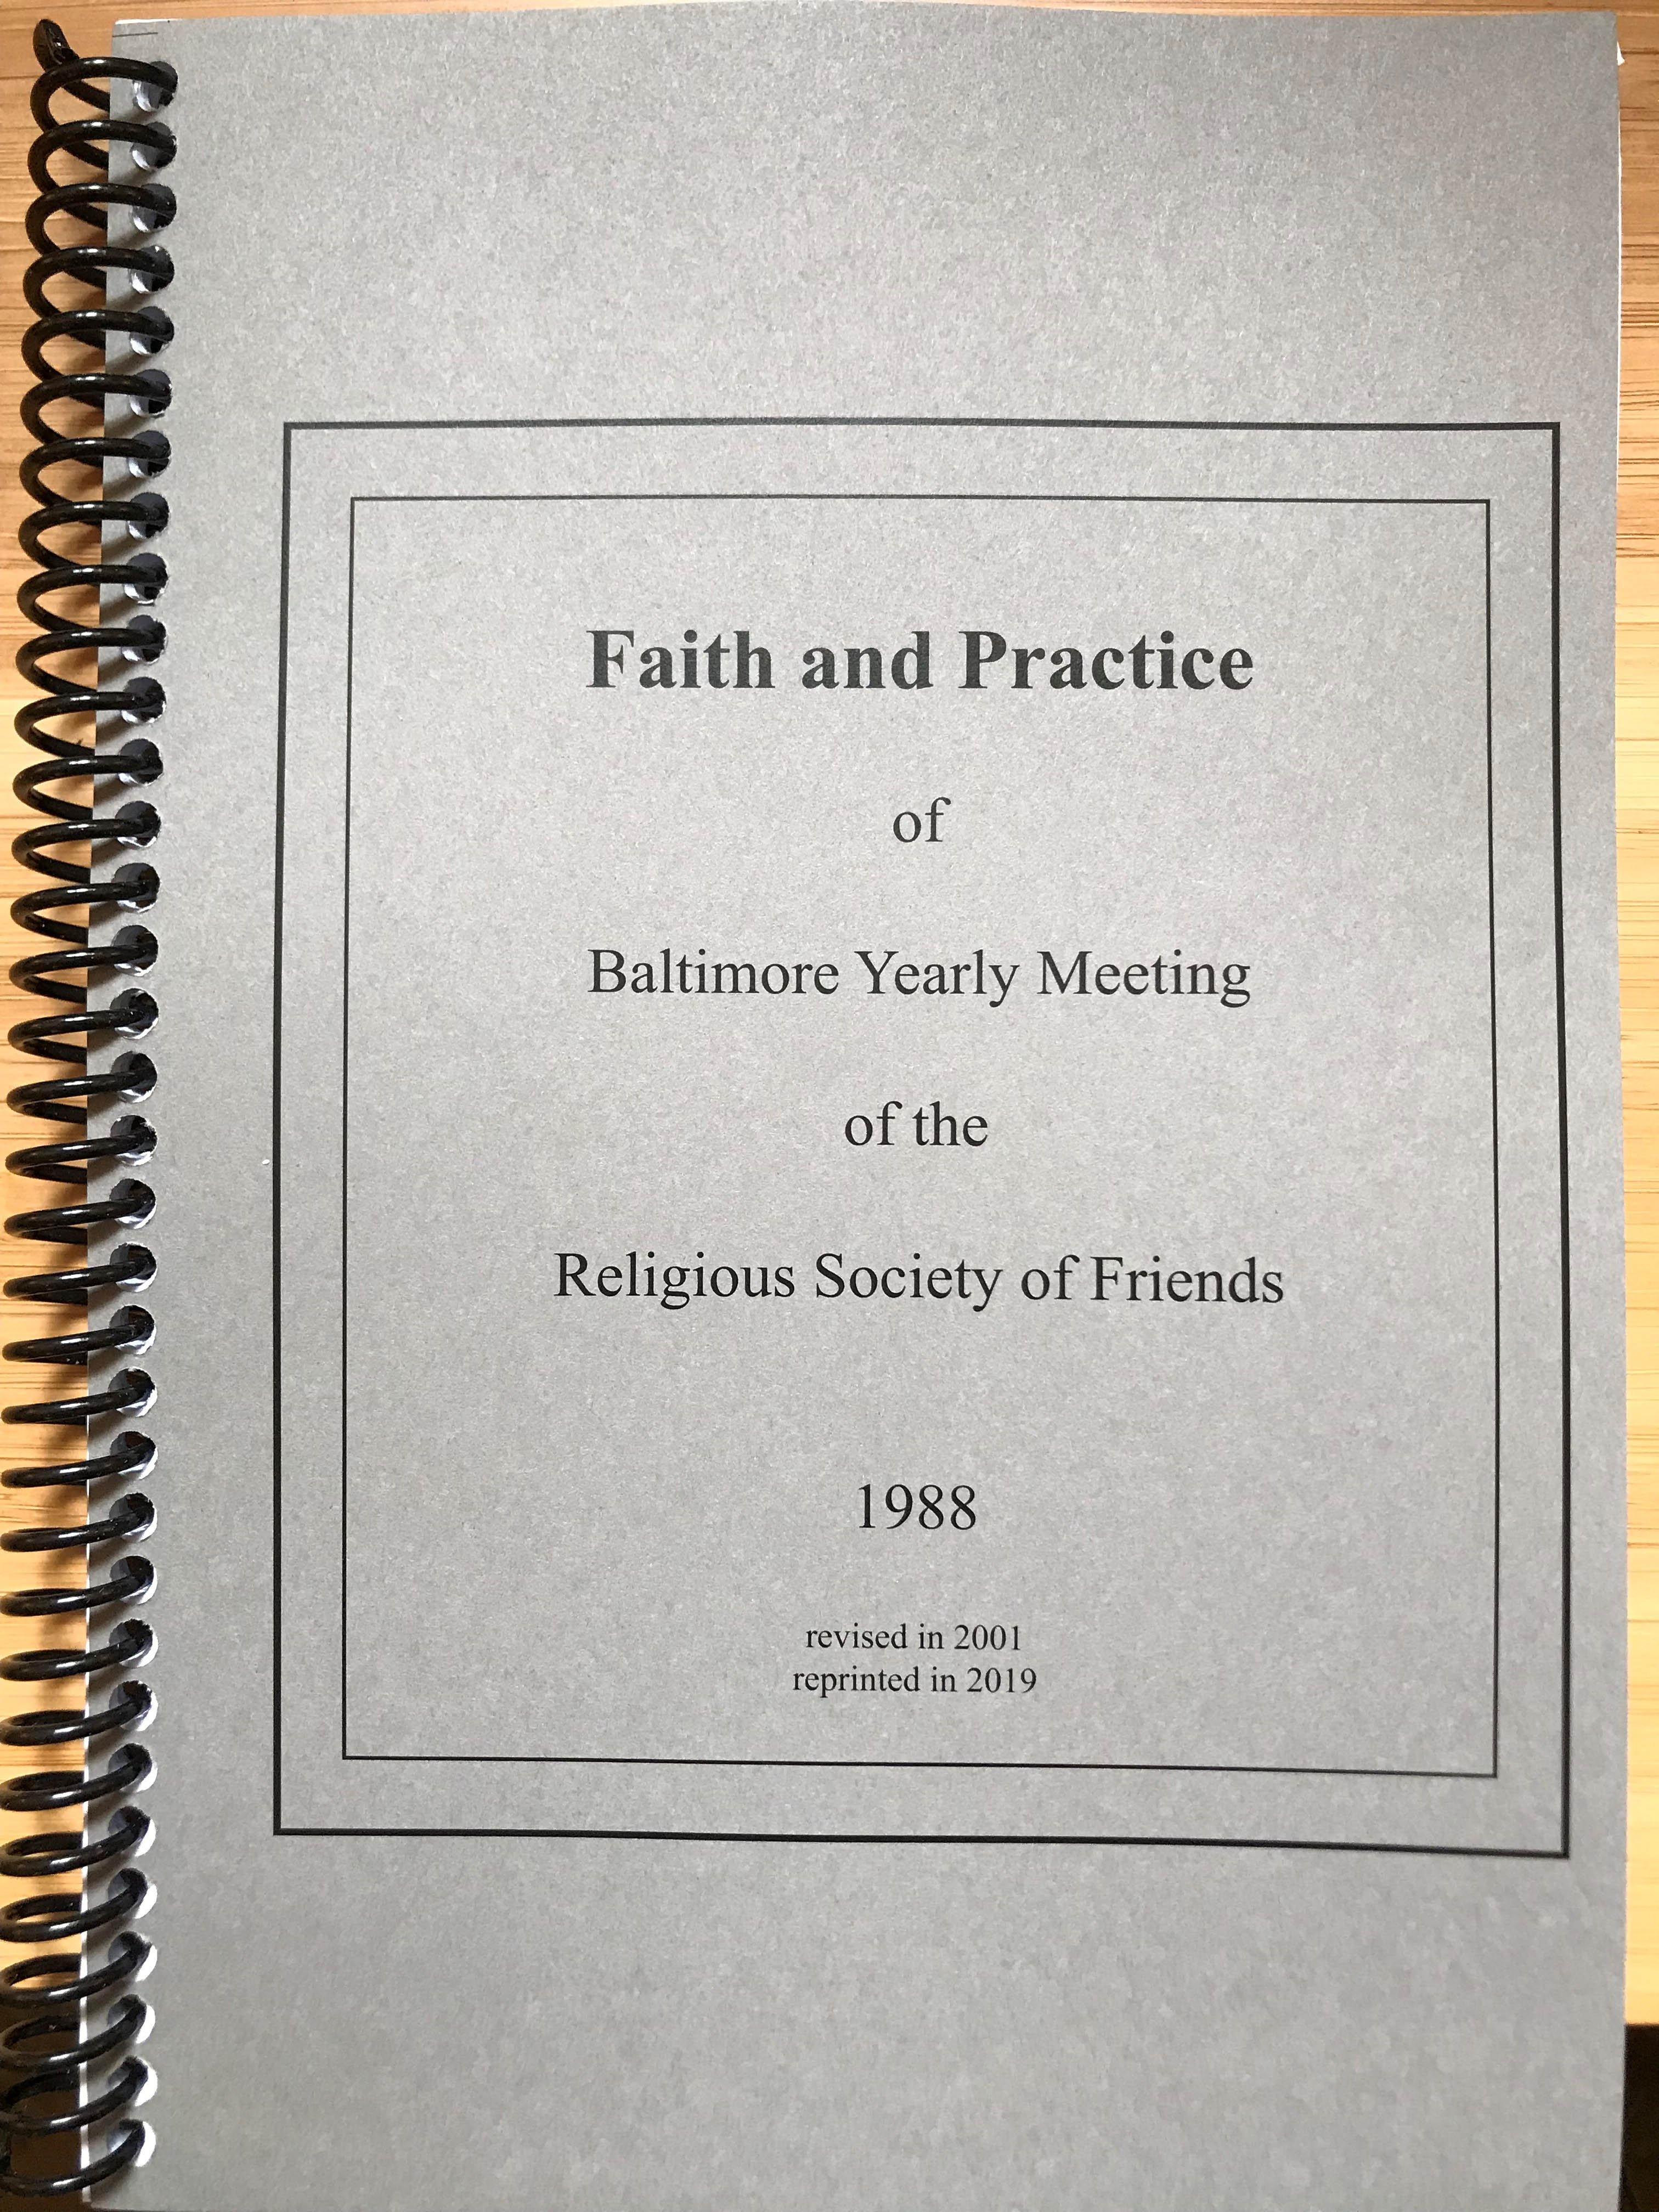 Faith and Practice, 1988 text with changes through 2021